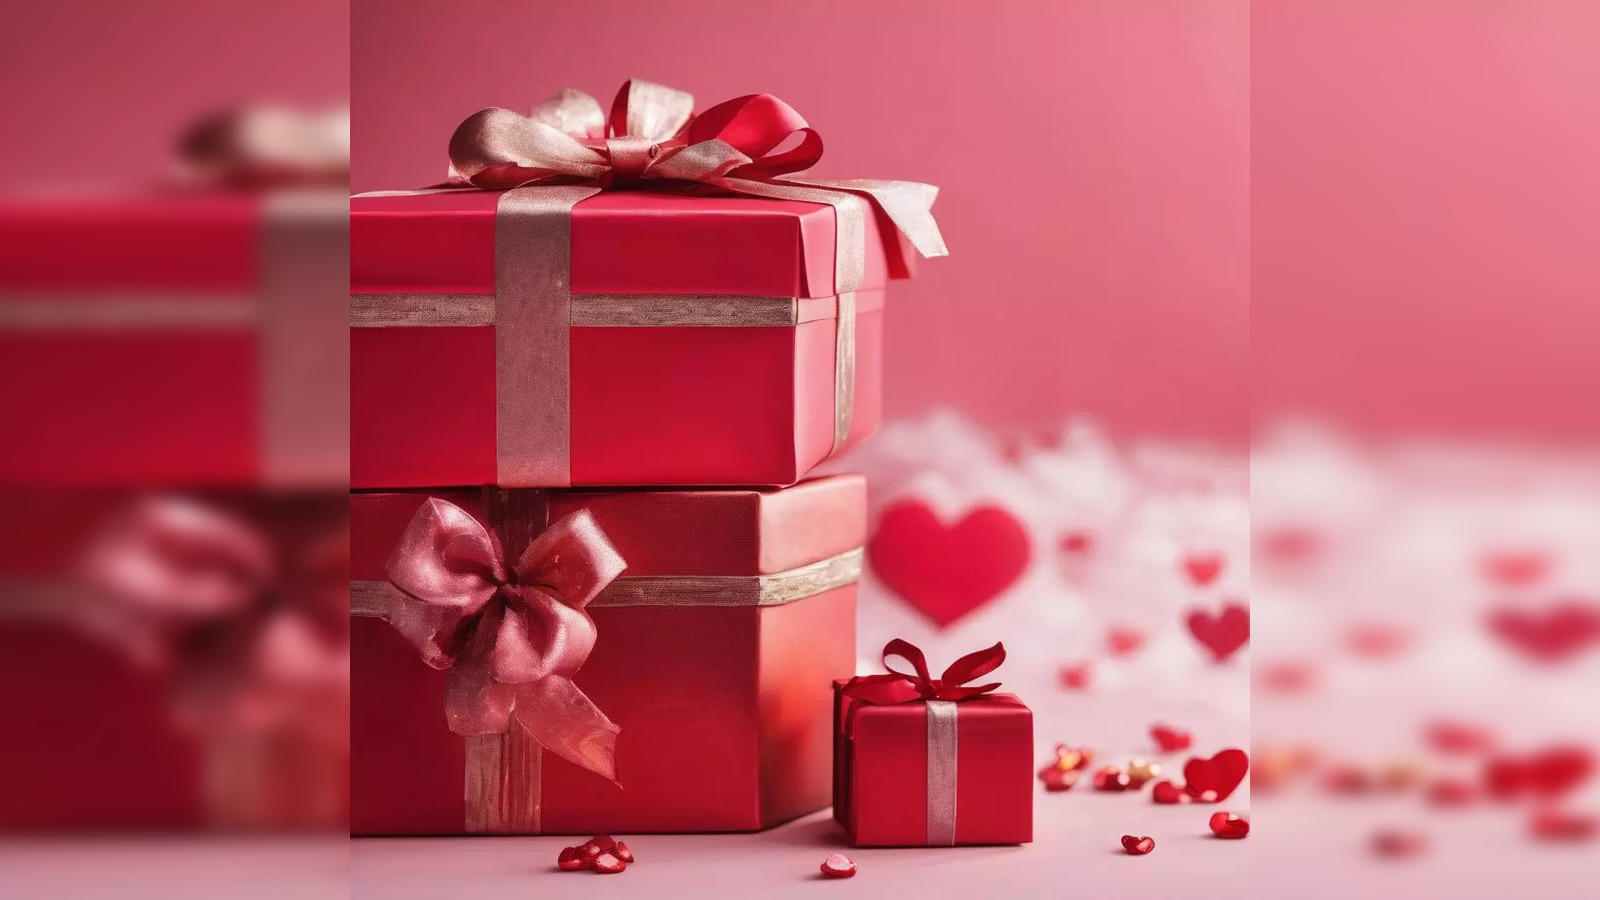 Timeless Valentine's Day gifts from Tata CLiQ Luxury | APN News